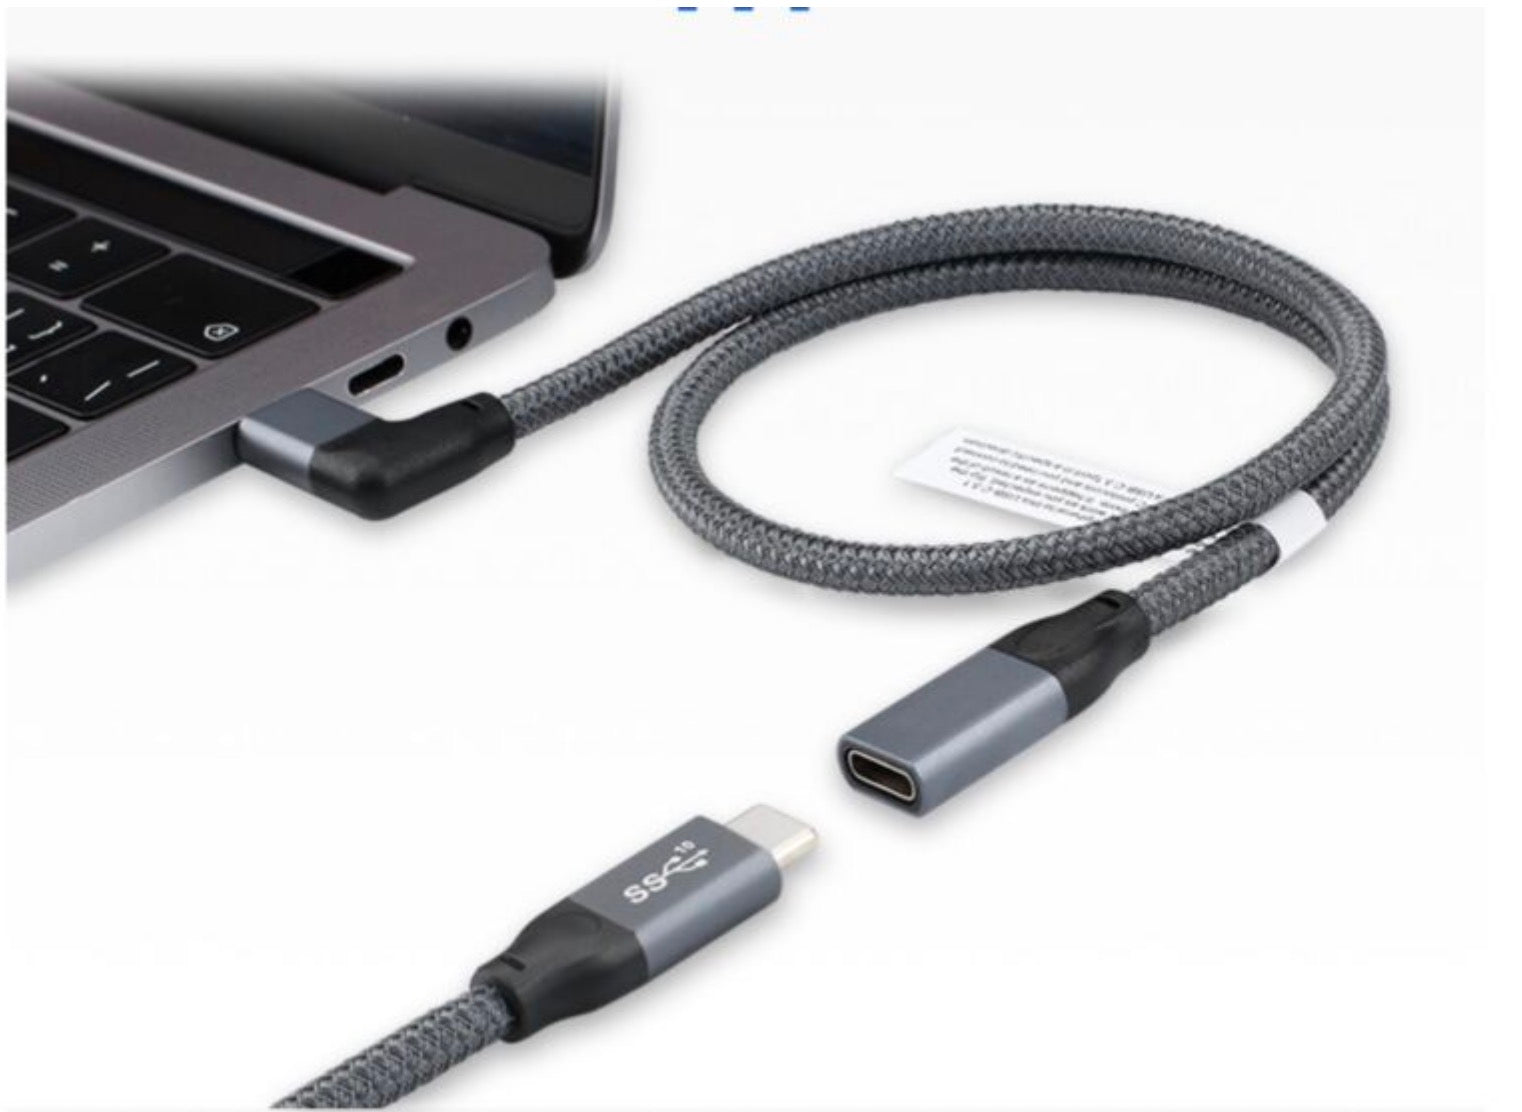 USB-C 3.1 Angled Male to Straight Female 100W Thunderbolt 3 Cable 10Gbps